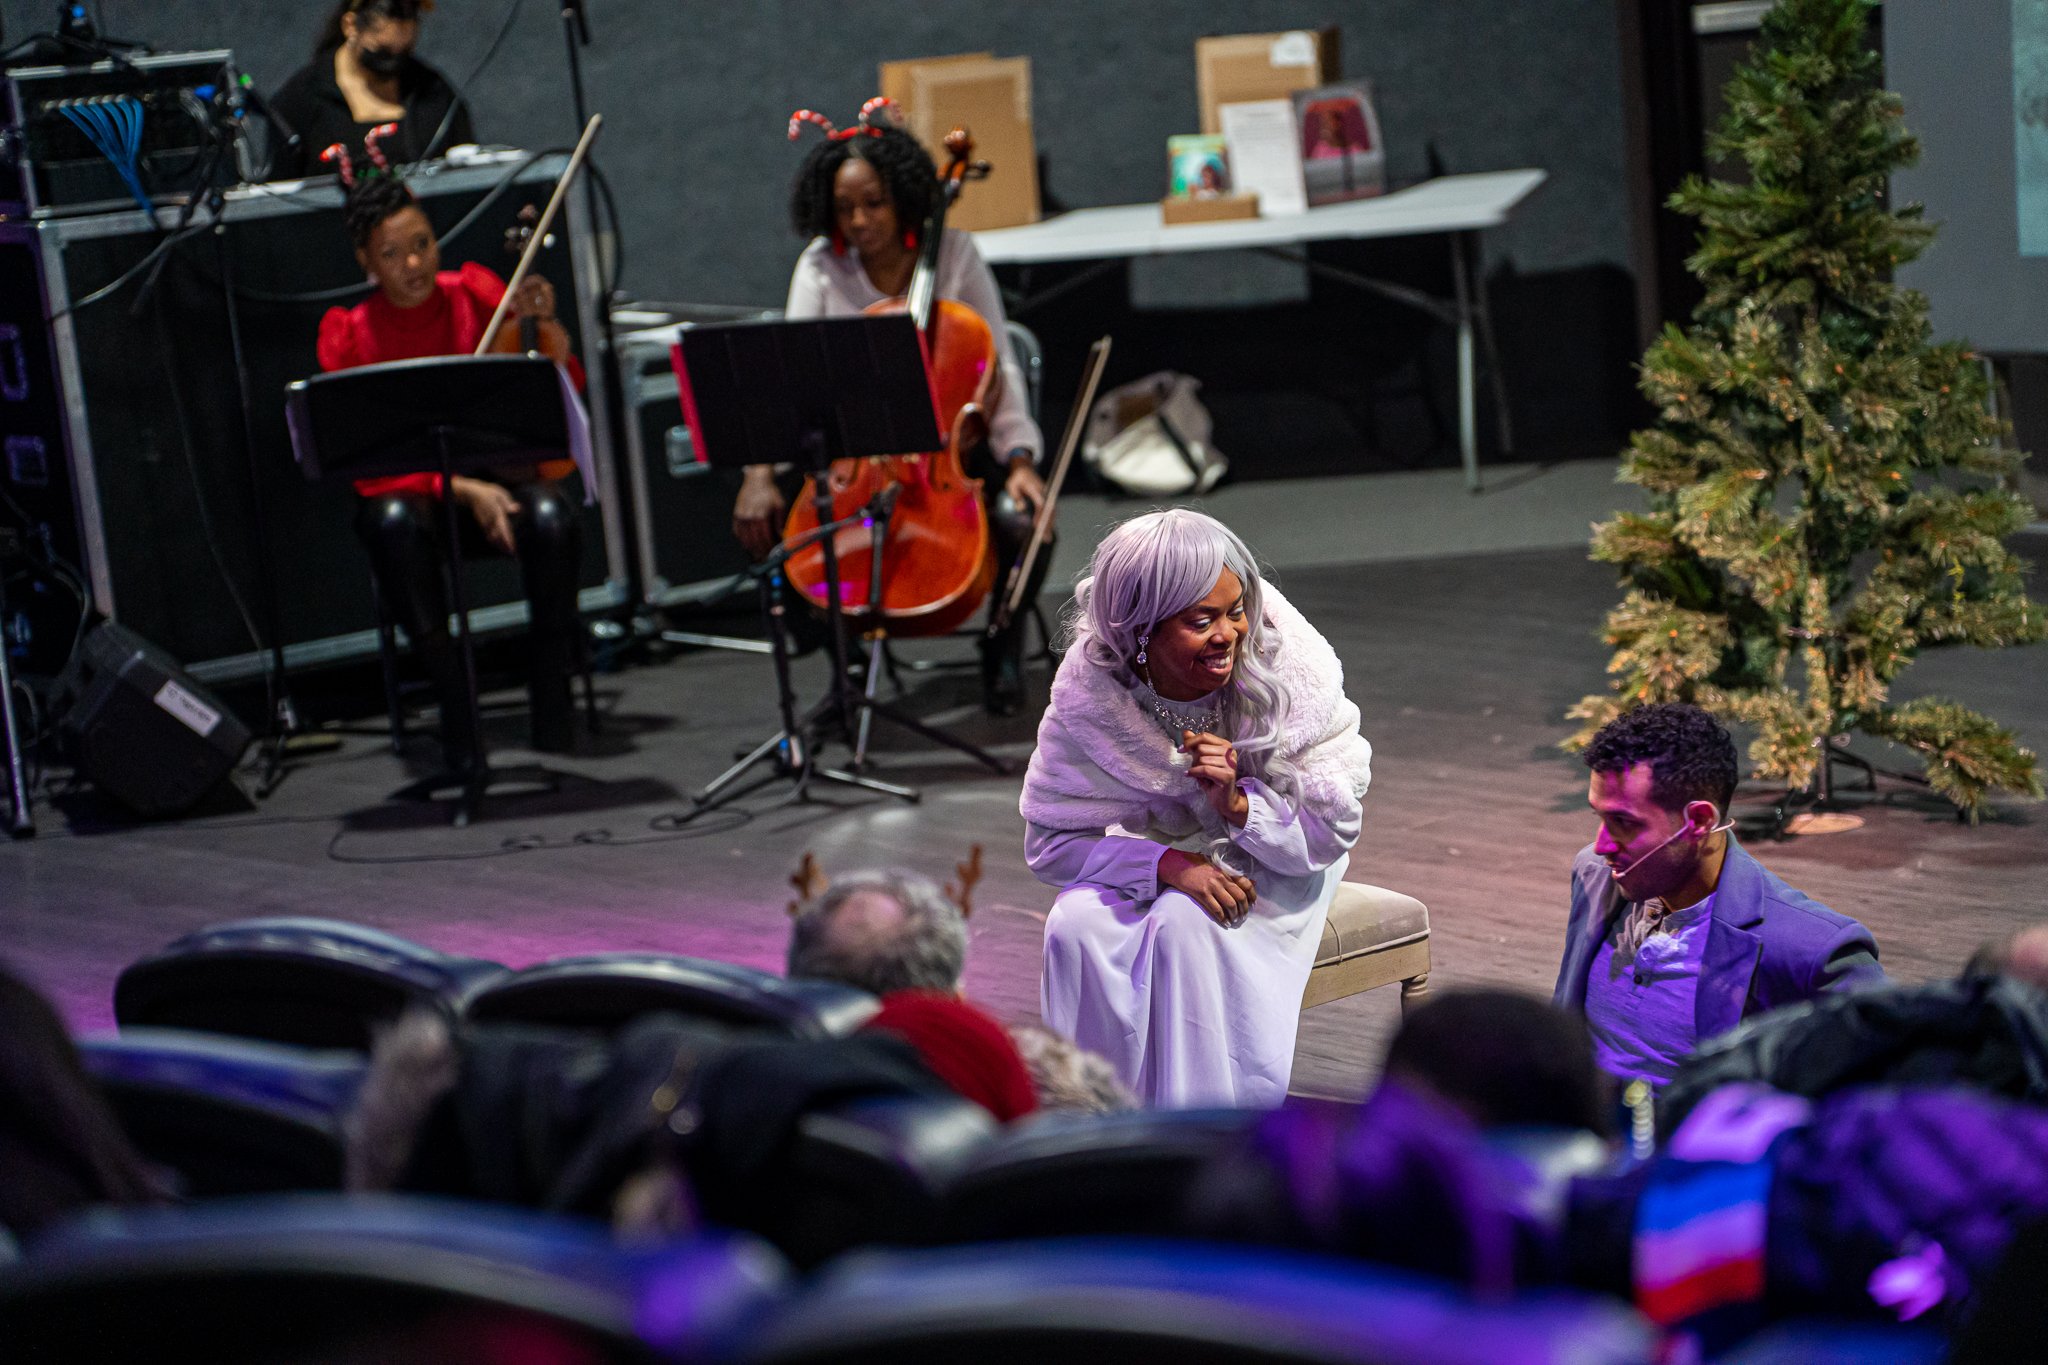 Black and Brown Theatre perform "The Snow Queen"